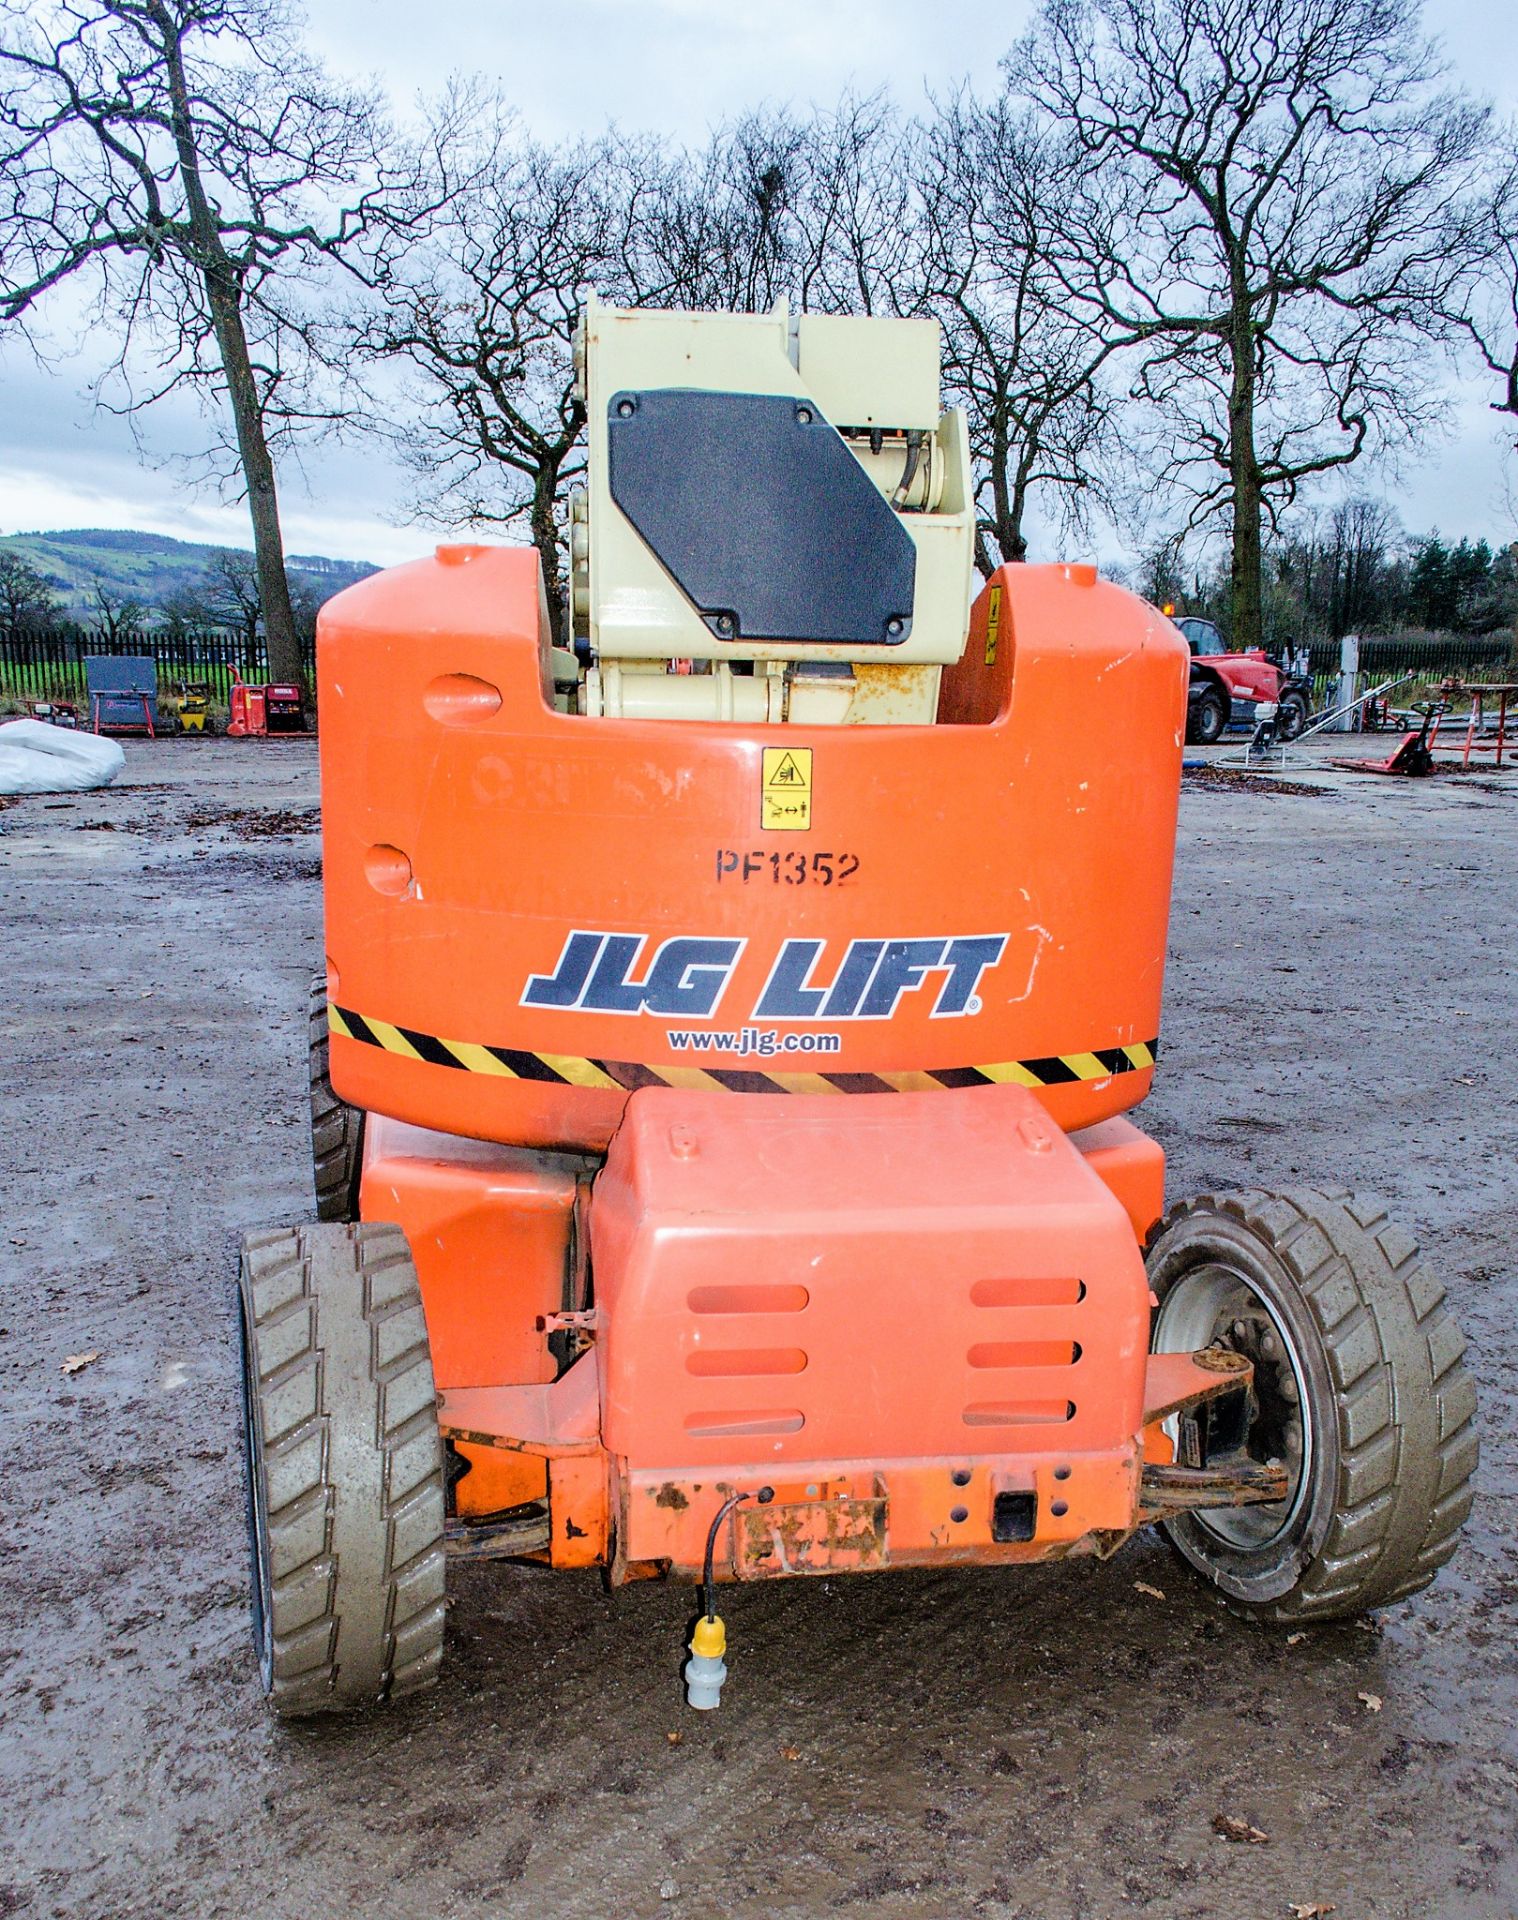 JLG M450AJ battery/diesel articulated boom access platform Year: 2011 S/N: 150483 Recorded Hours: - Image 10 of 13